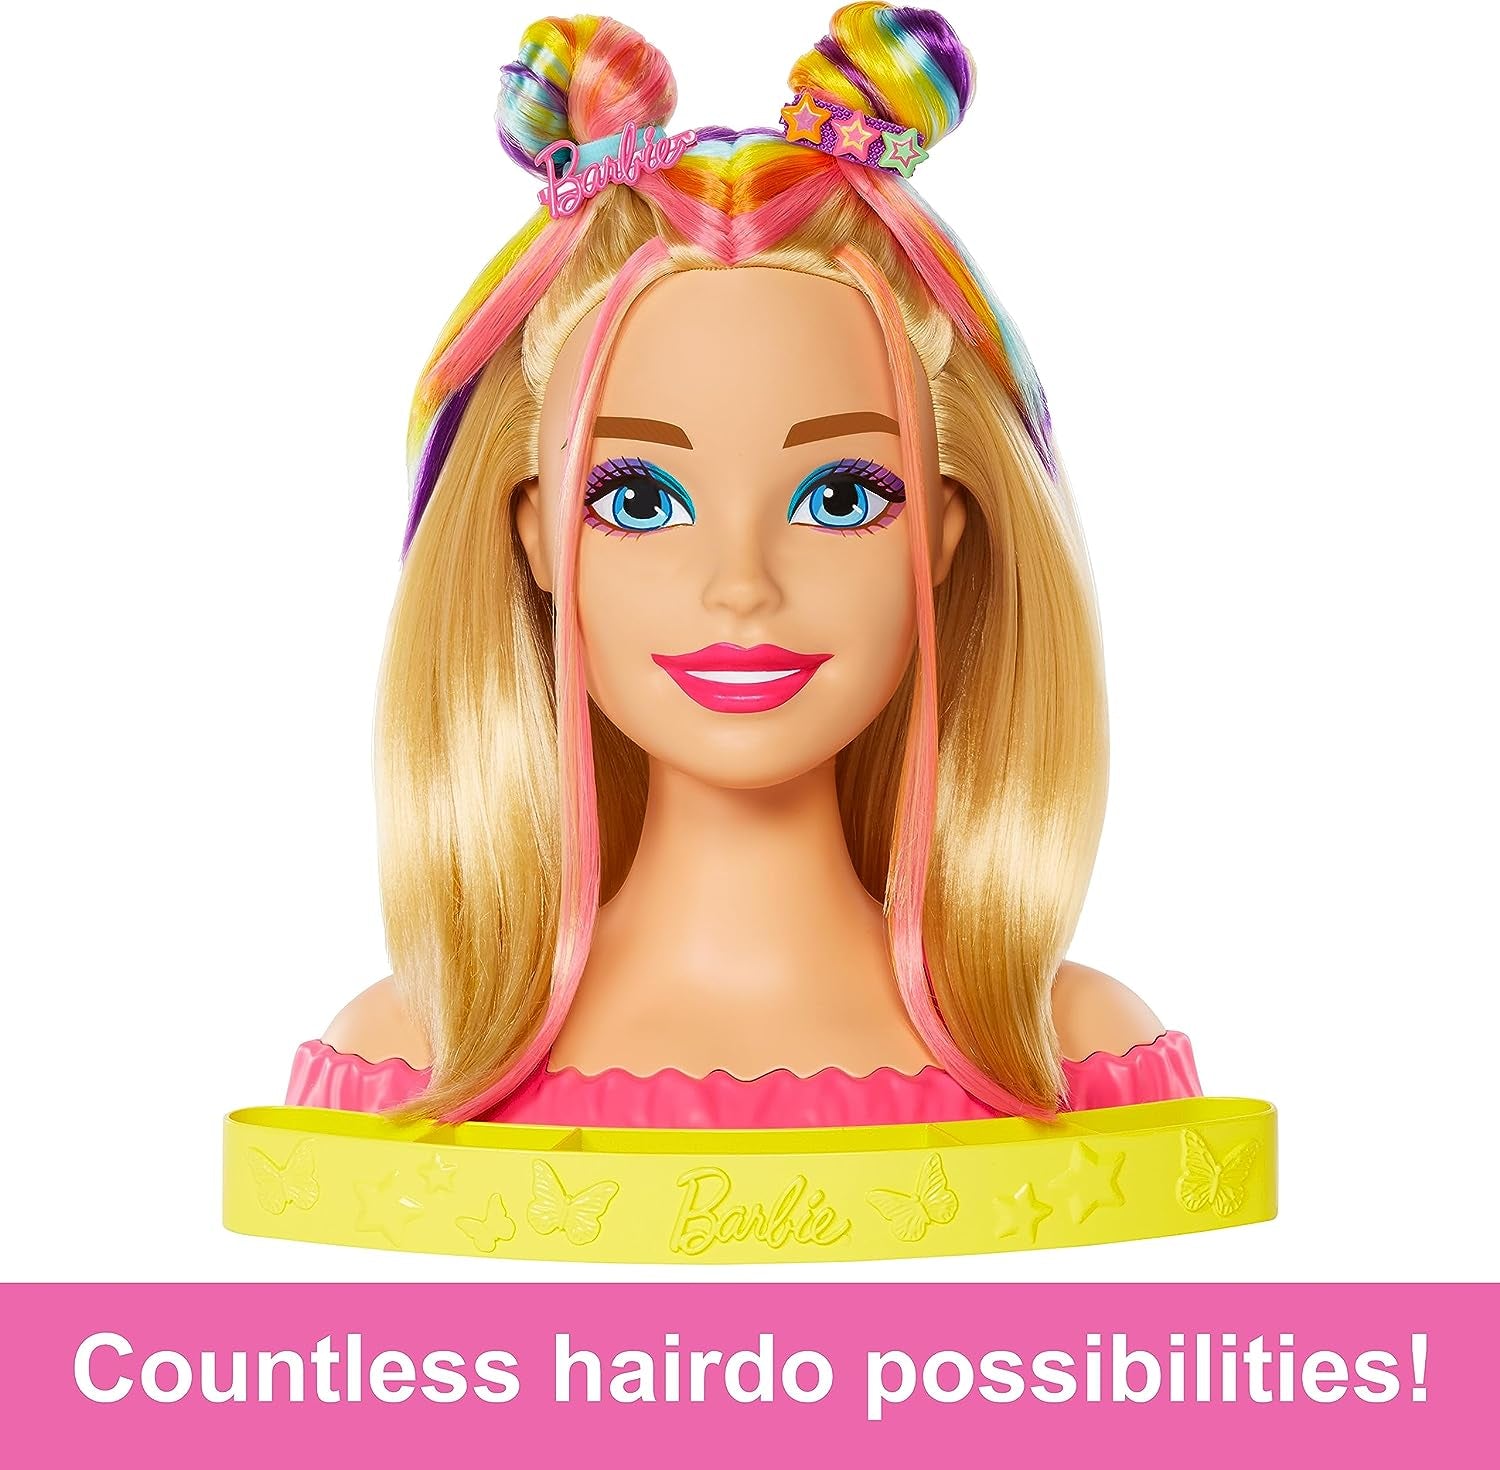 Doll Deluxe Styling Head with Color Reveal Accessories and Straight Blonde Neon Rainbow Hair, Doll Head for Hair Styling, HMD78